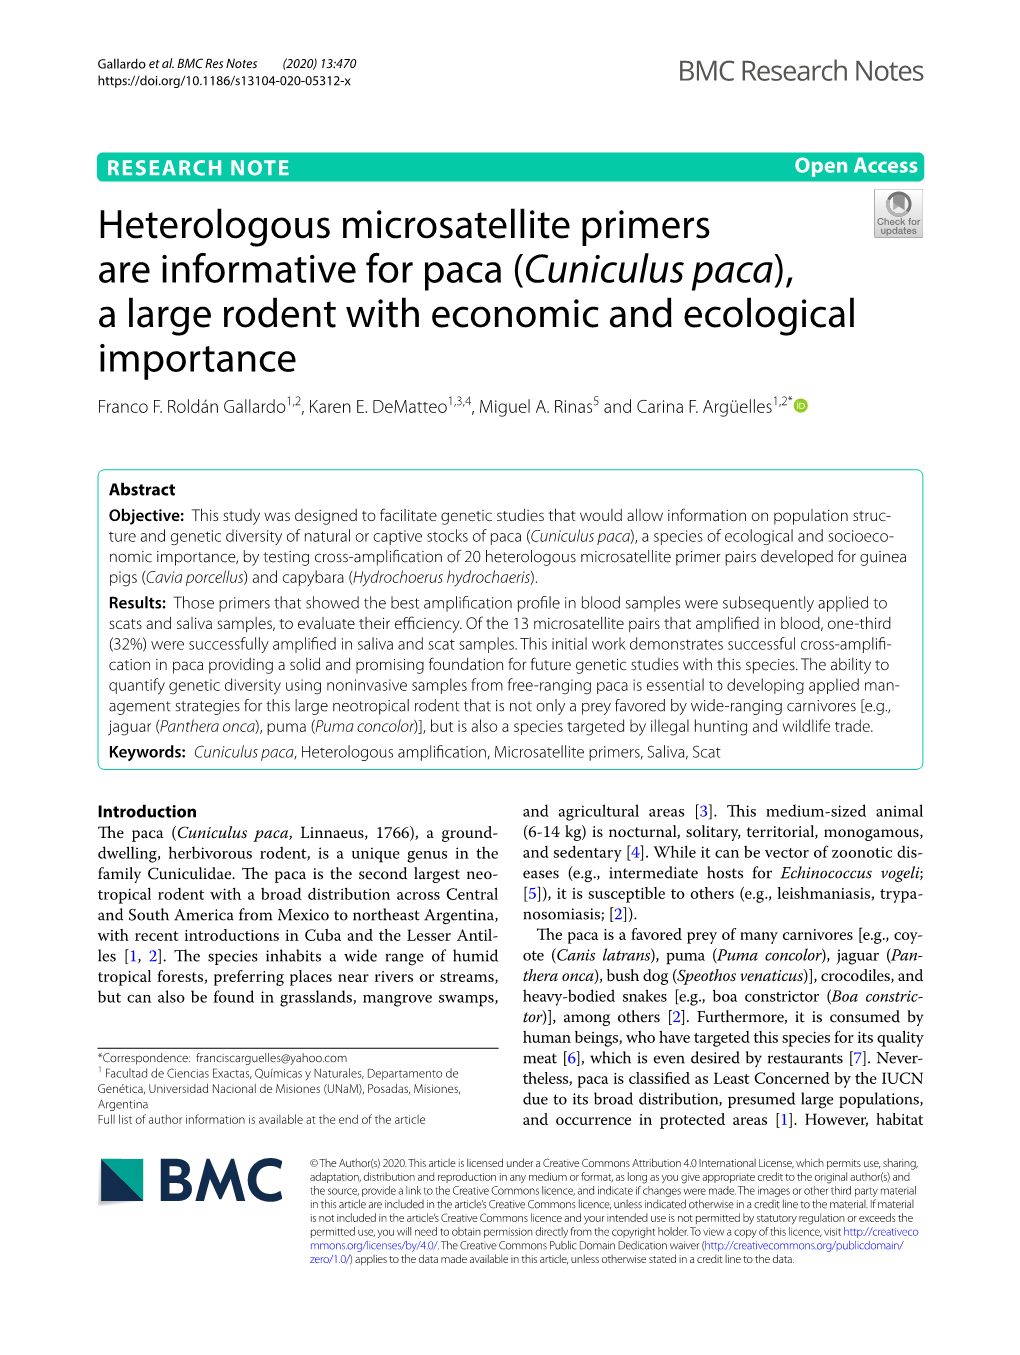 Heterologous Microsatellite Primers Are Informative for Paca (Cuniculus Paca), a Large Rodent with Economic and Ecological Importance Franco F